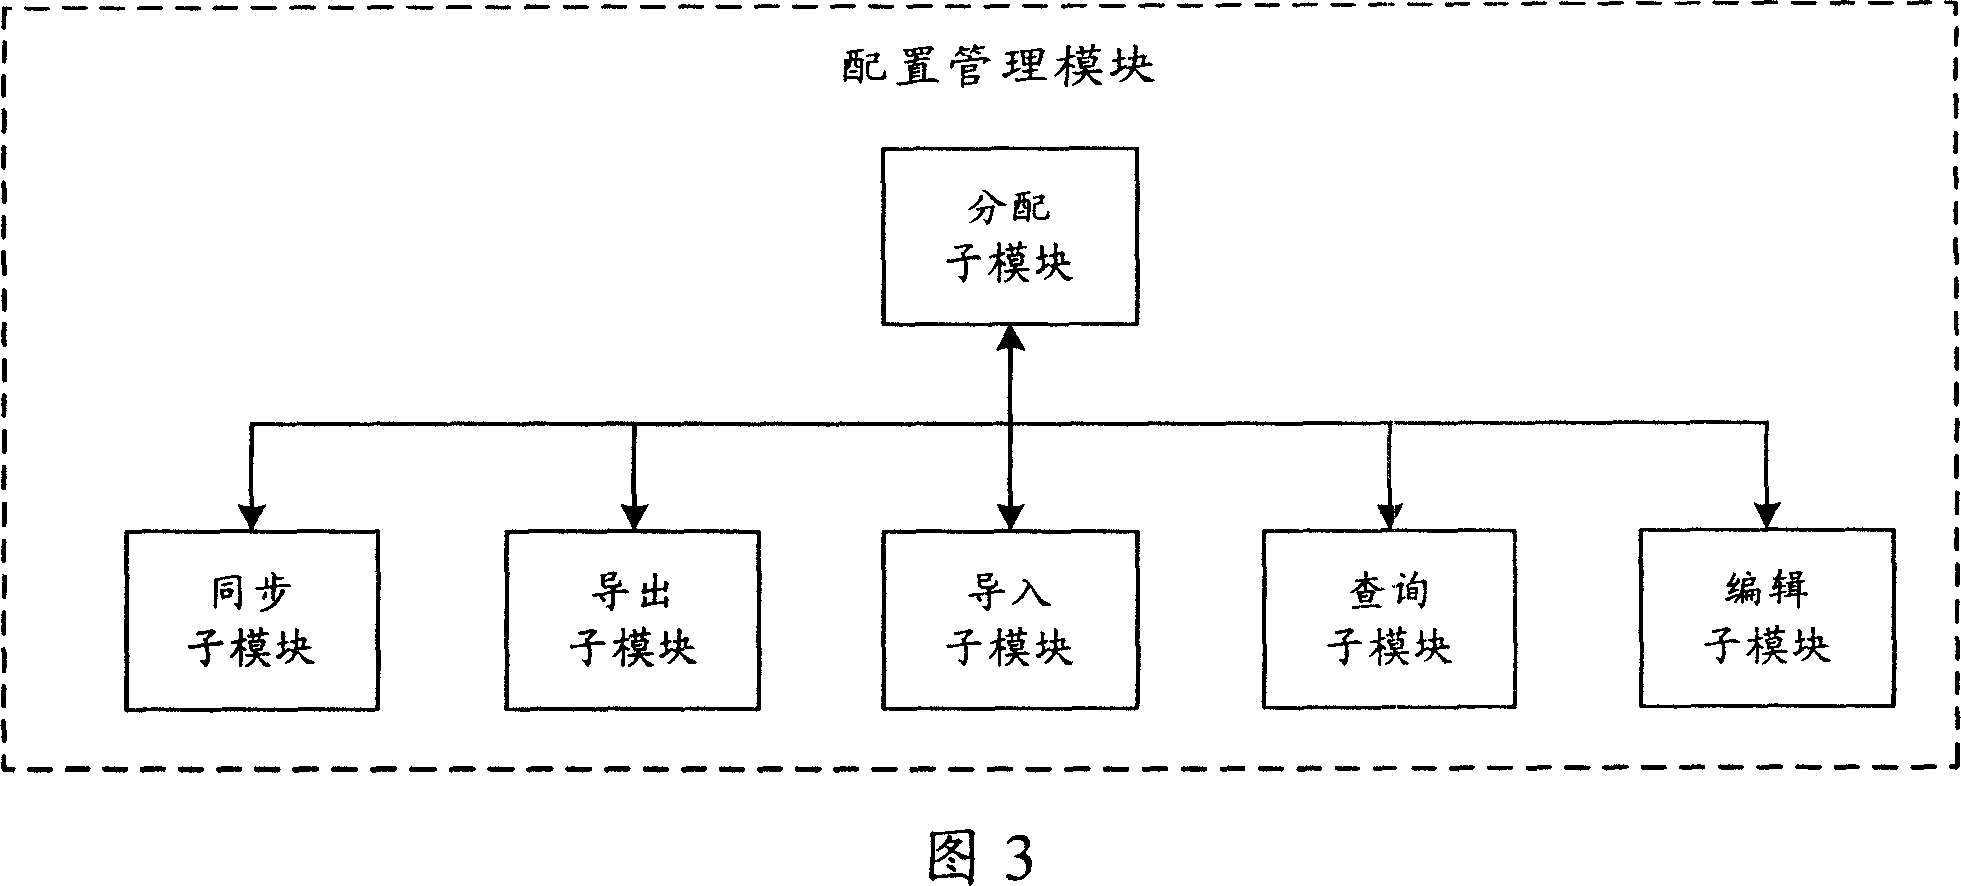 Equipment configuration information management method and its system